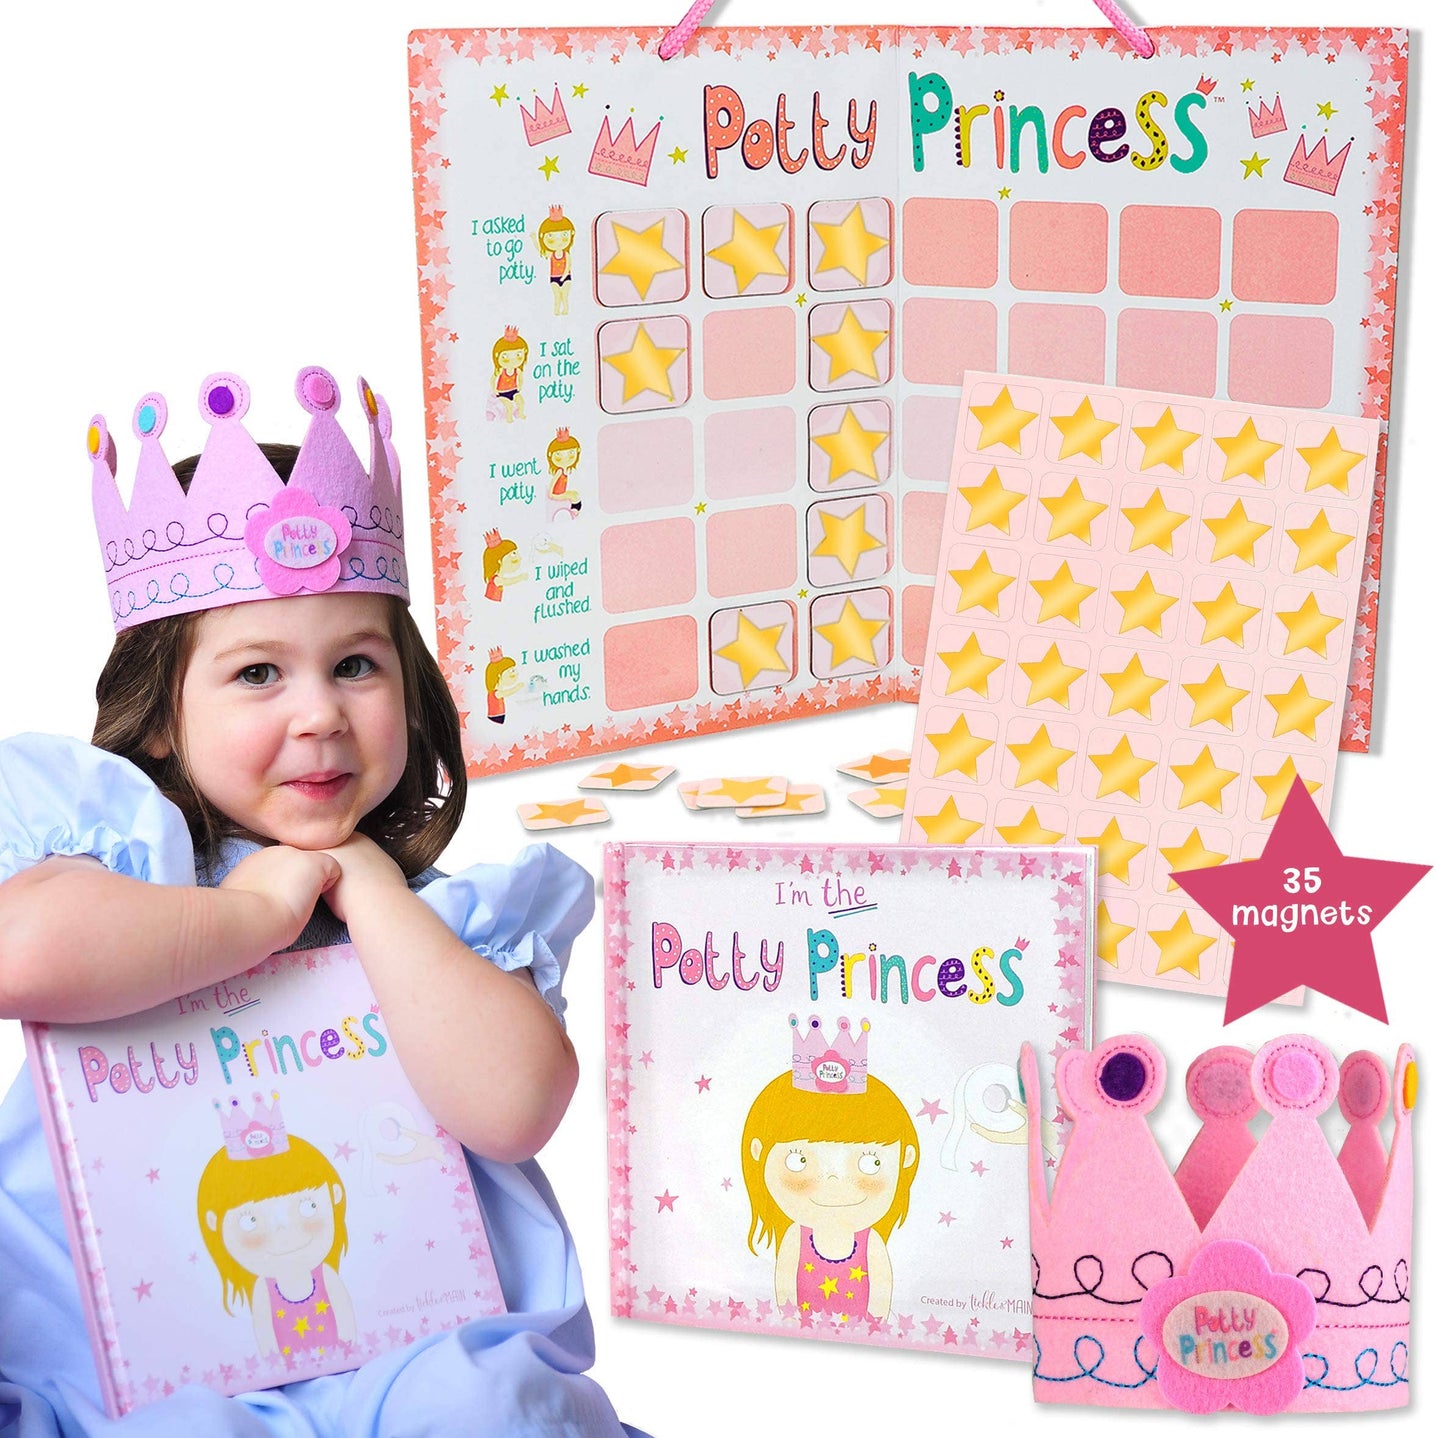 Princess Potty Training Gift Set w/ Book, Magnets and Crown